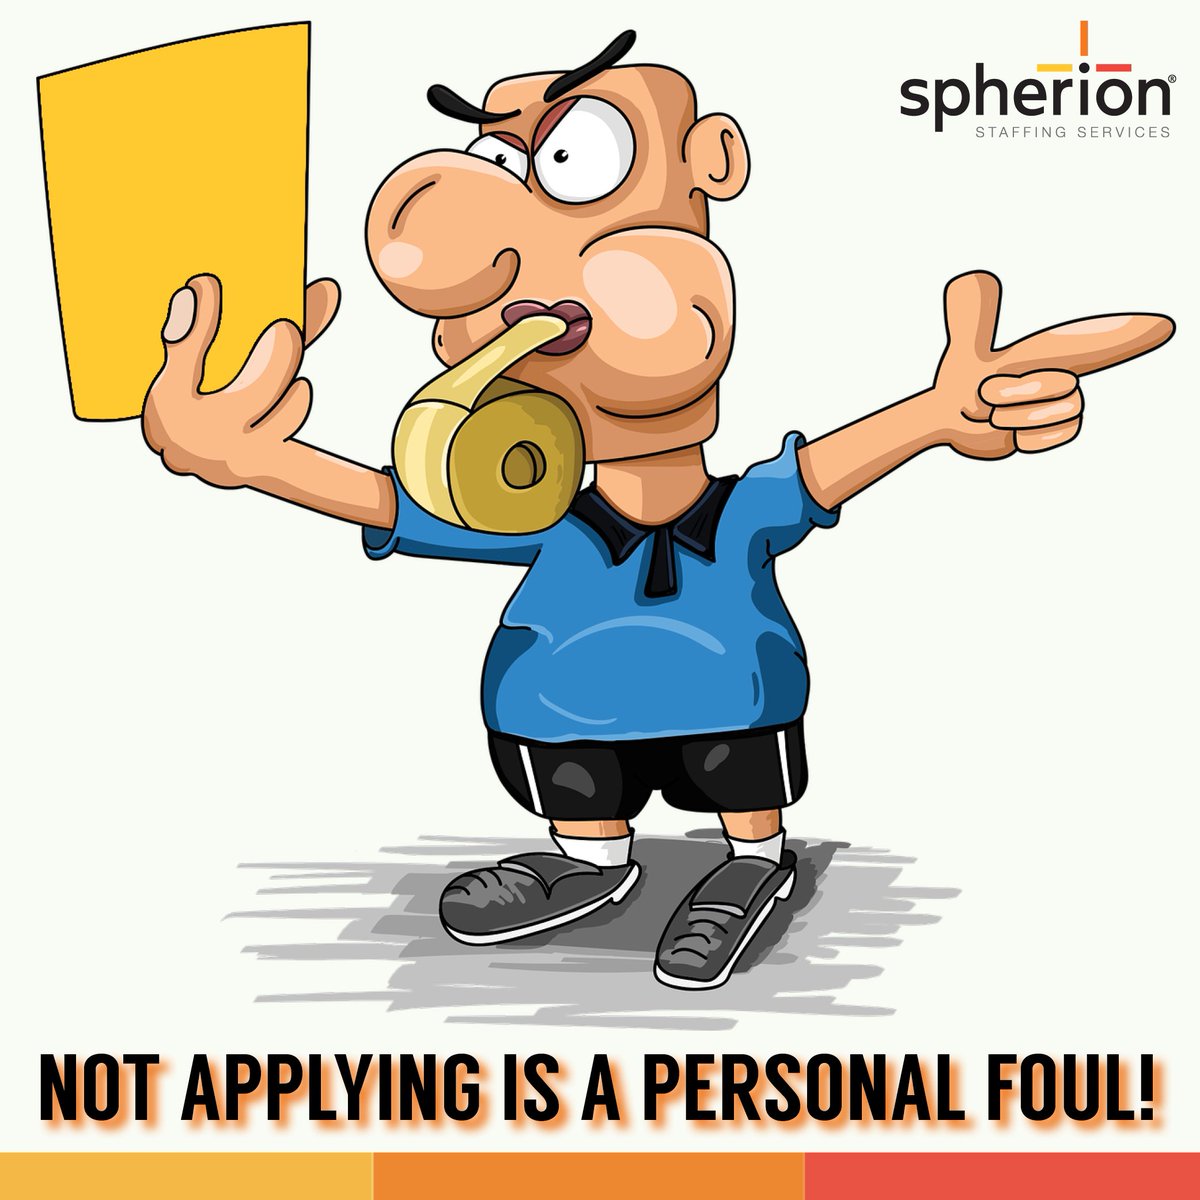 NOT APPLYING IS A PERSONAL FOUL!
APPLY FOR YOUR NEXT JOB @ SPHERION.
Learn more and apply here: bit.ly/2nnFpZR
#newjob #jobfair #jobinterivew #workwithspherion

OPEN INTERVIEWS: Tuesday 9/25 & Thursday 9/27 | 10am - 12pm
📍1925 E Edgewood Dr #102 Lakeland